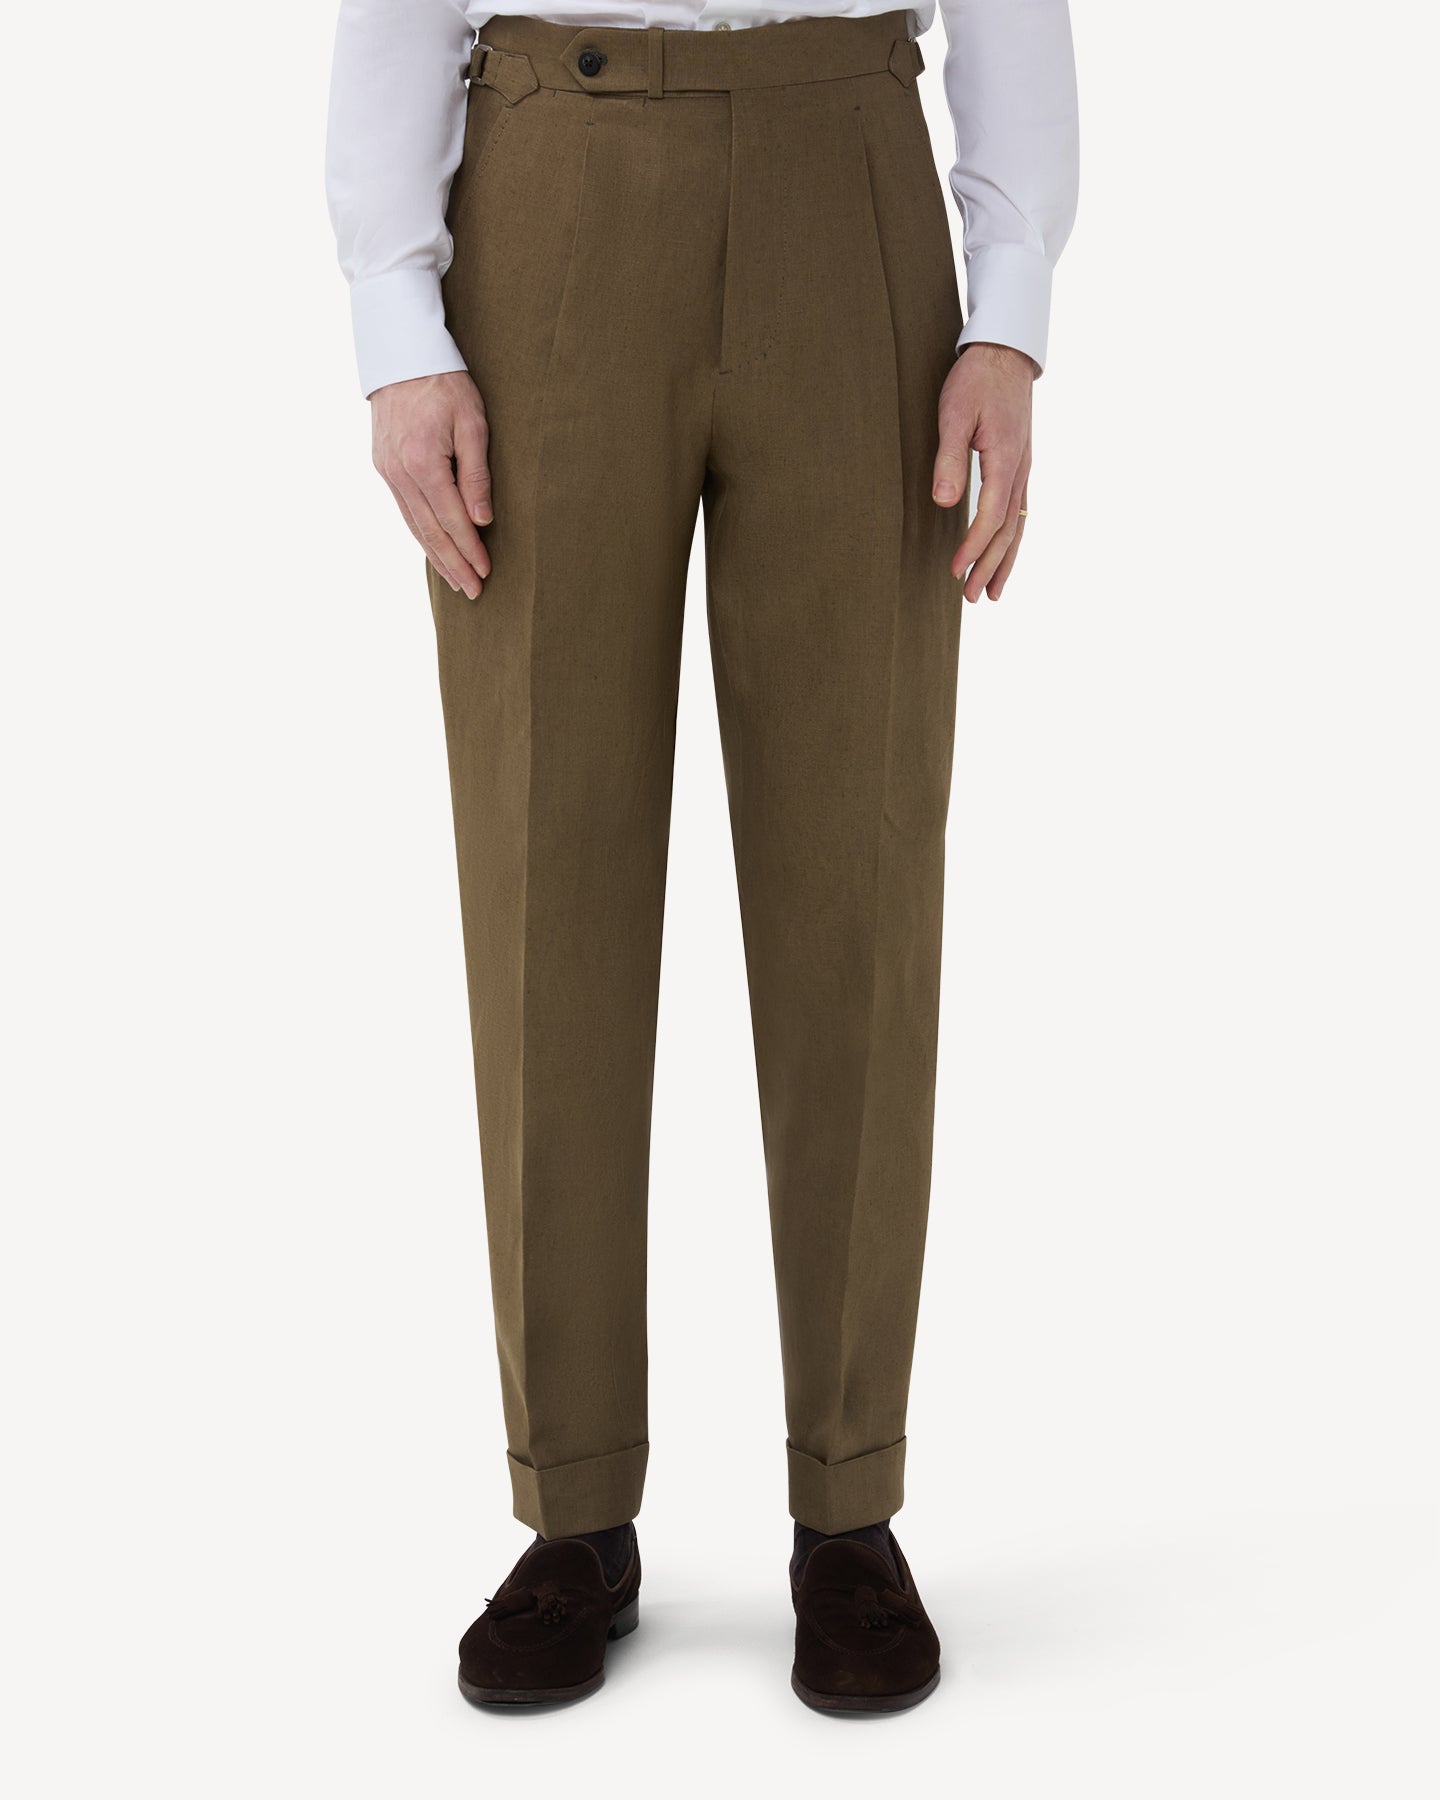 The front of olive brown linen trousers with single pleats and side adjusters